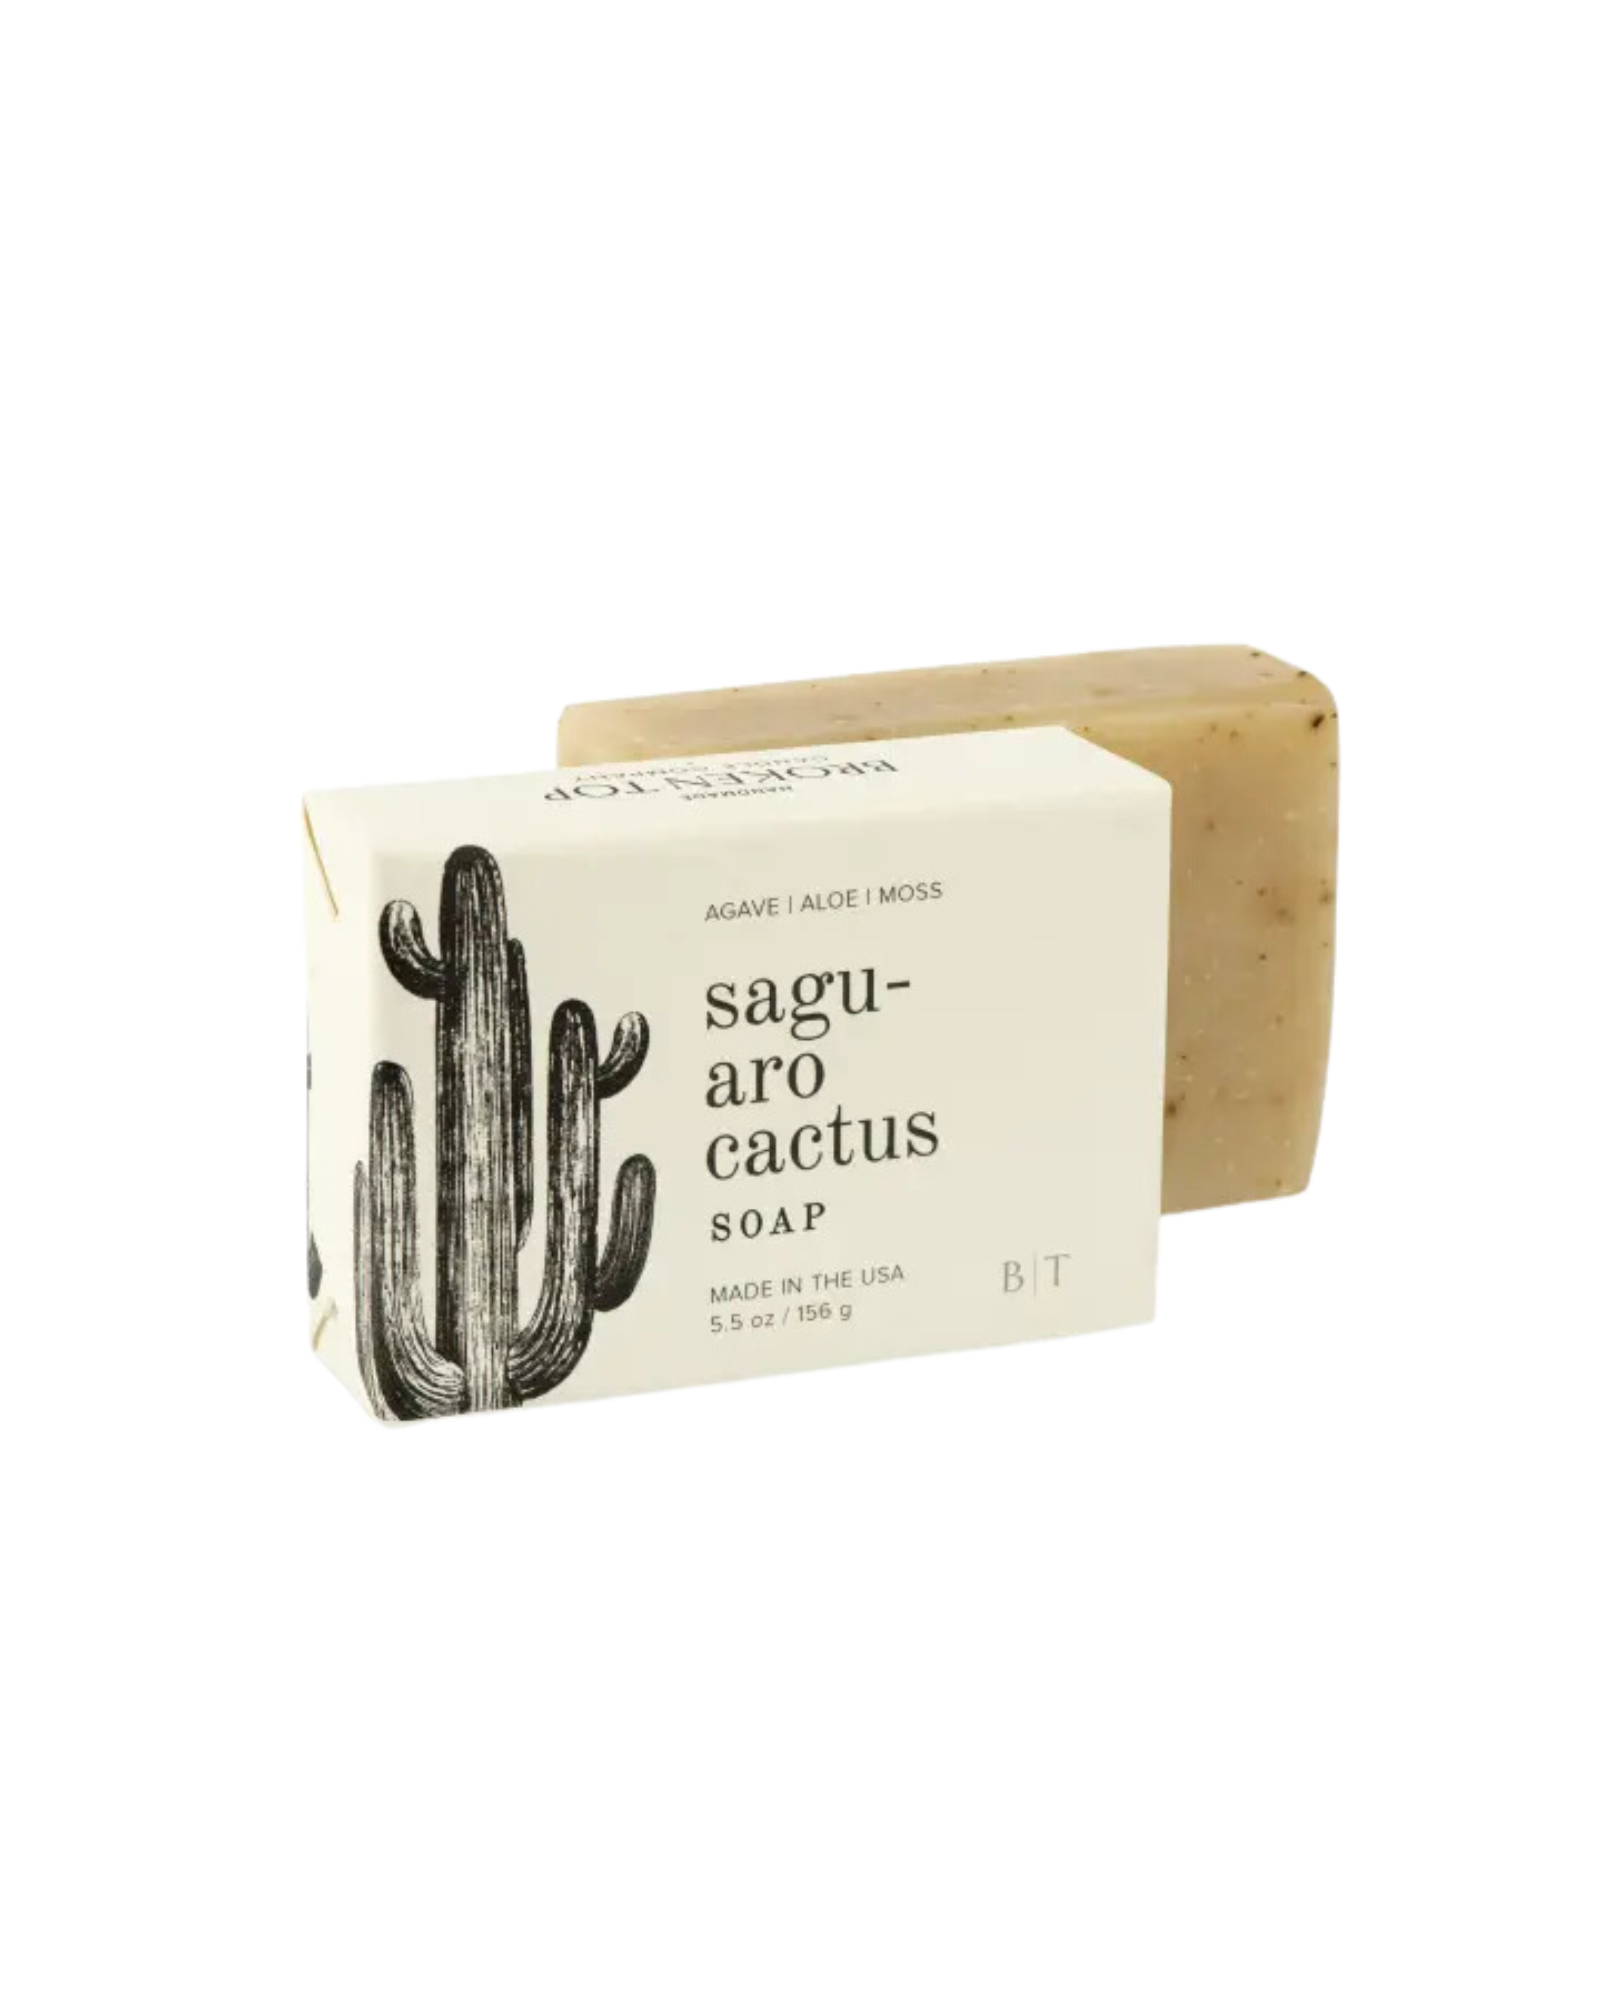 Two bars of saguaro cactus soap - one in packaging and one unwrapped